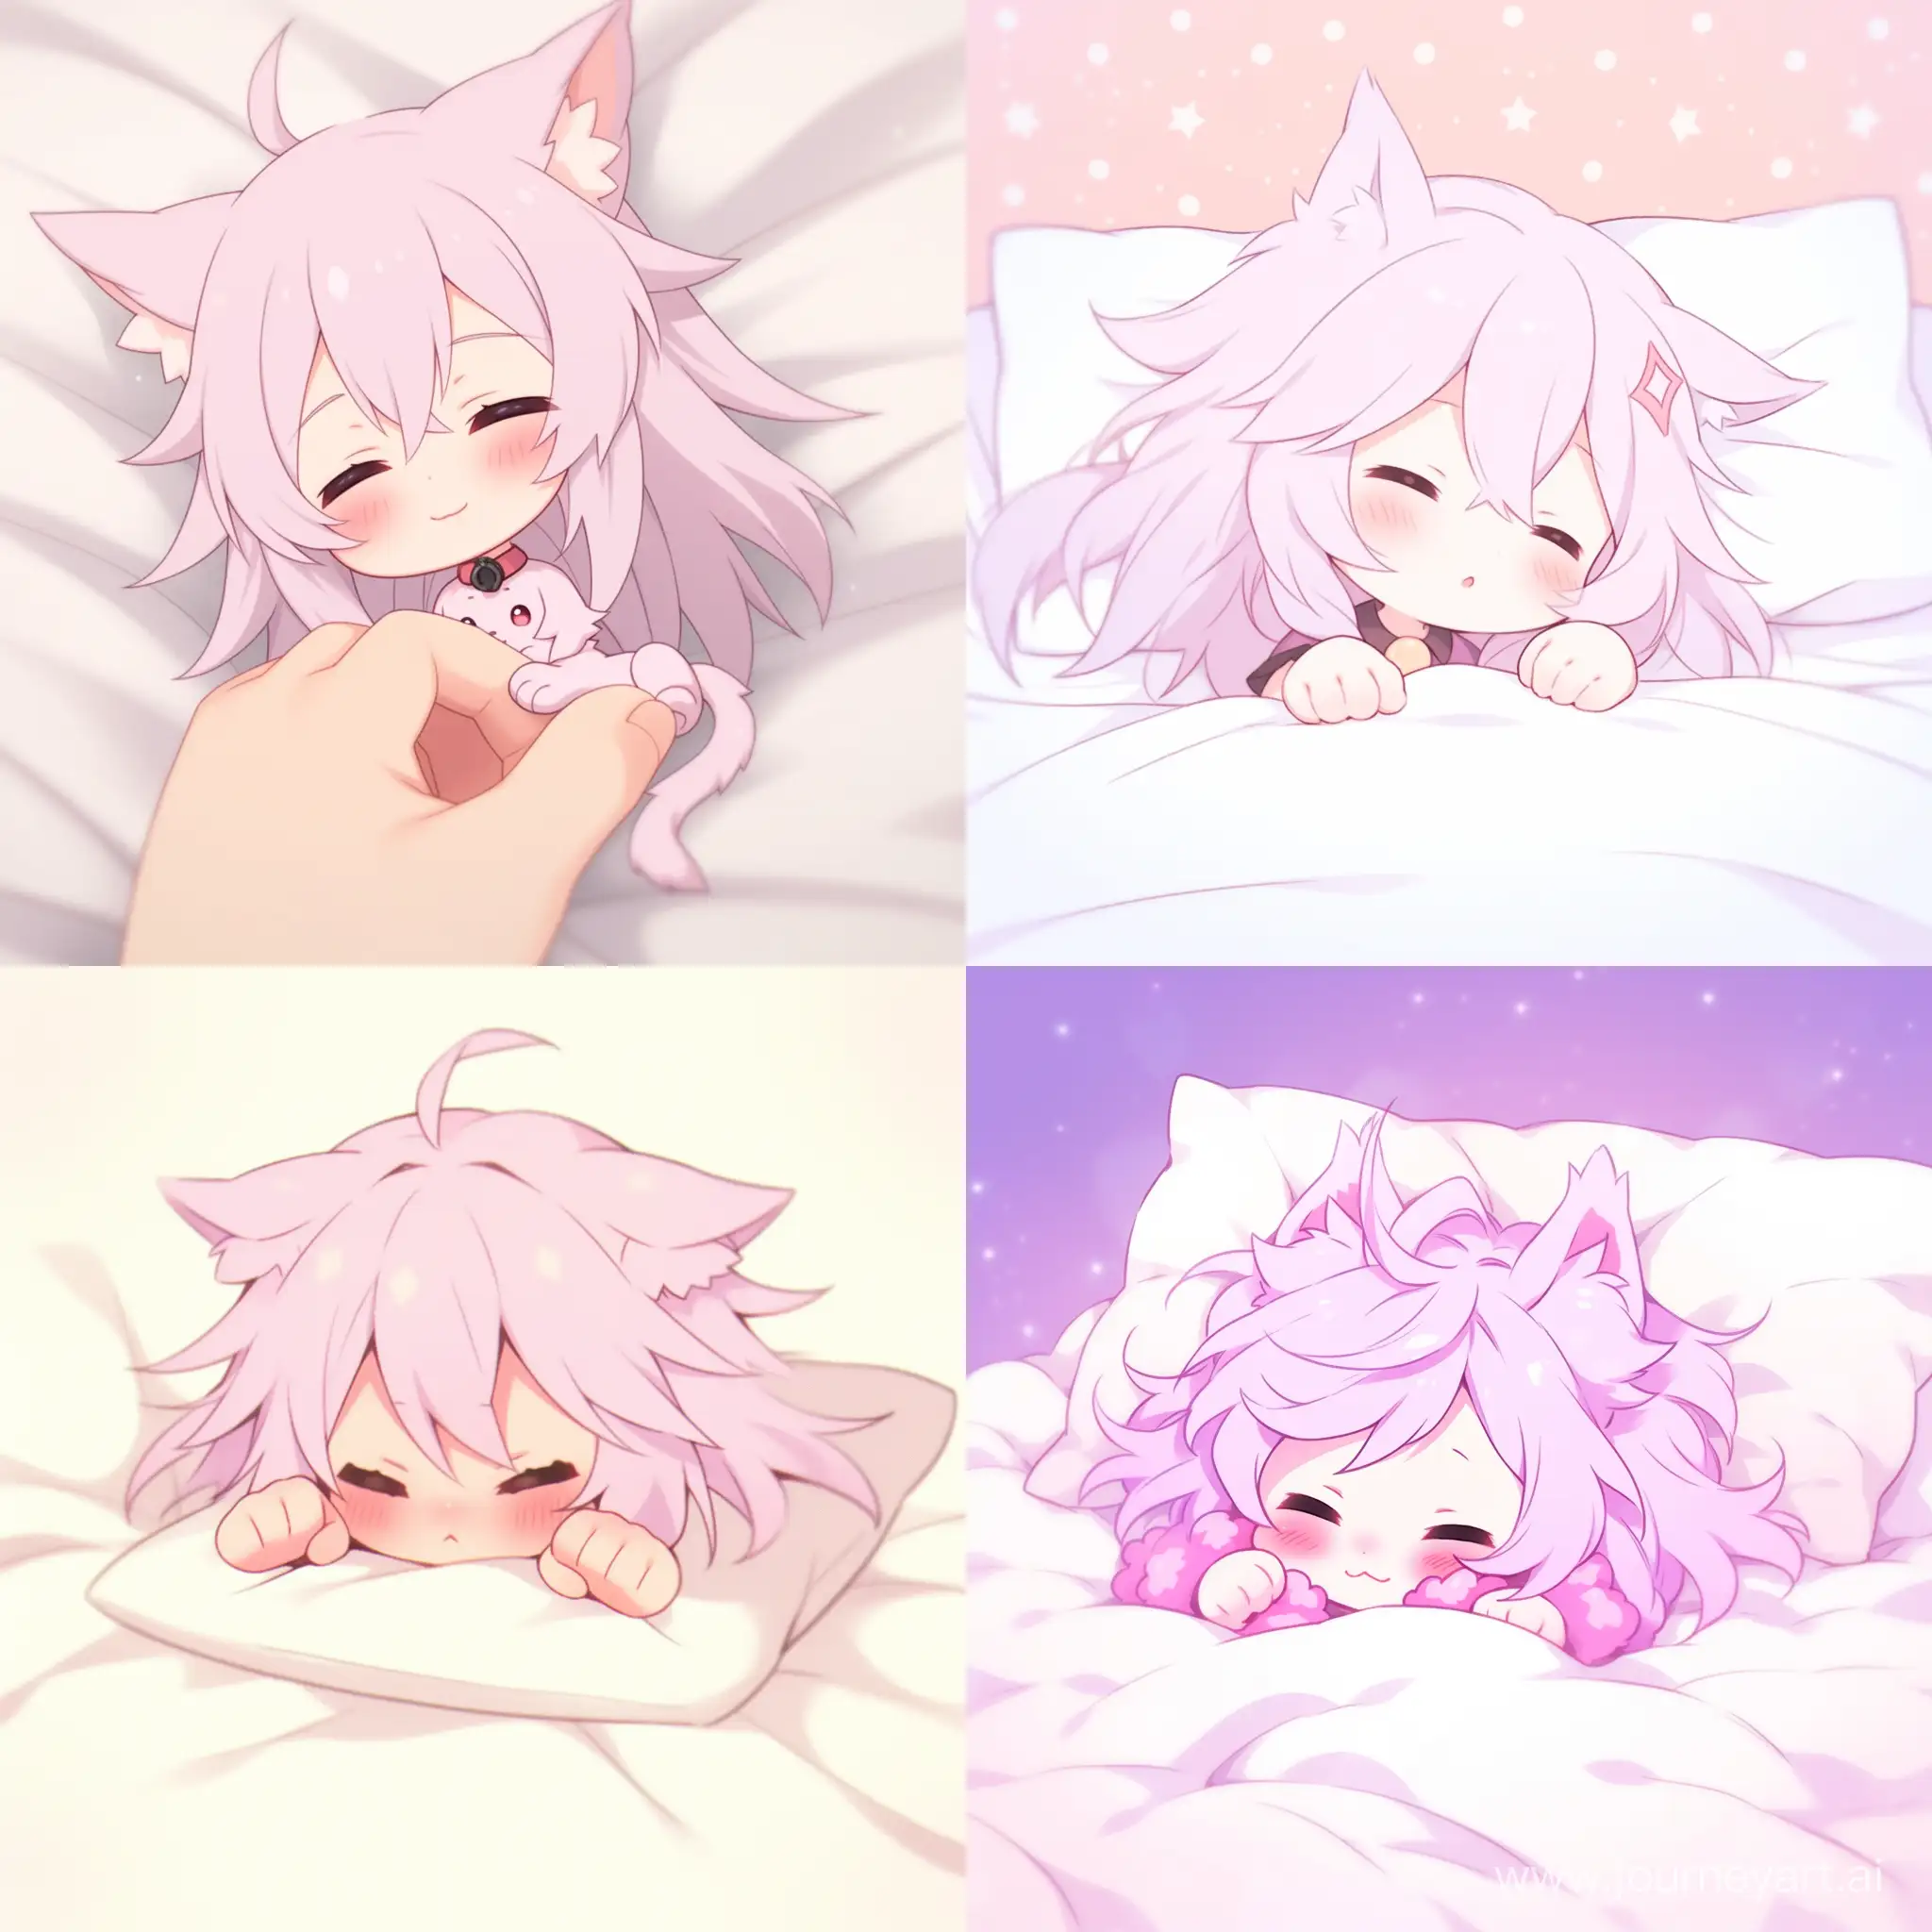 Adorable-PinkHaired-Anime-Girl-in-Carefree-Slumber